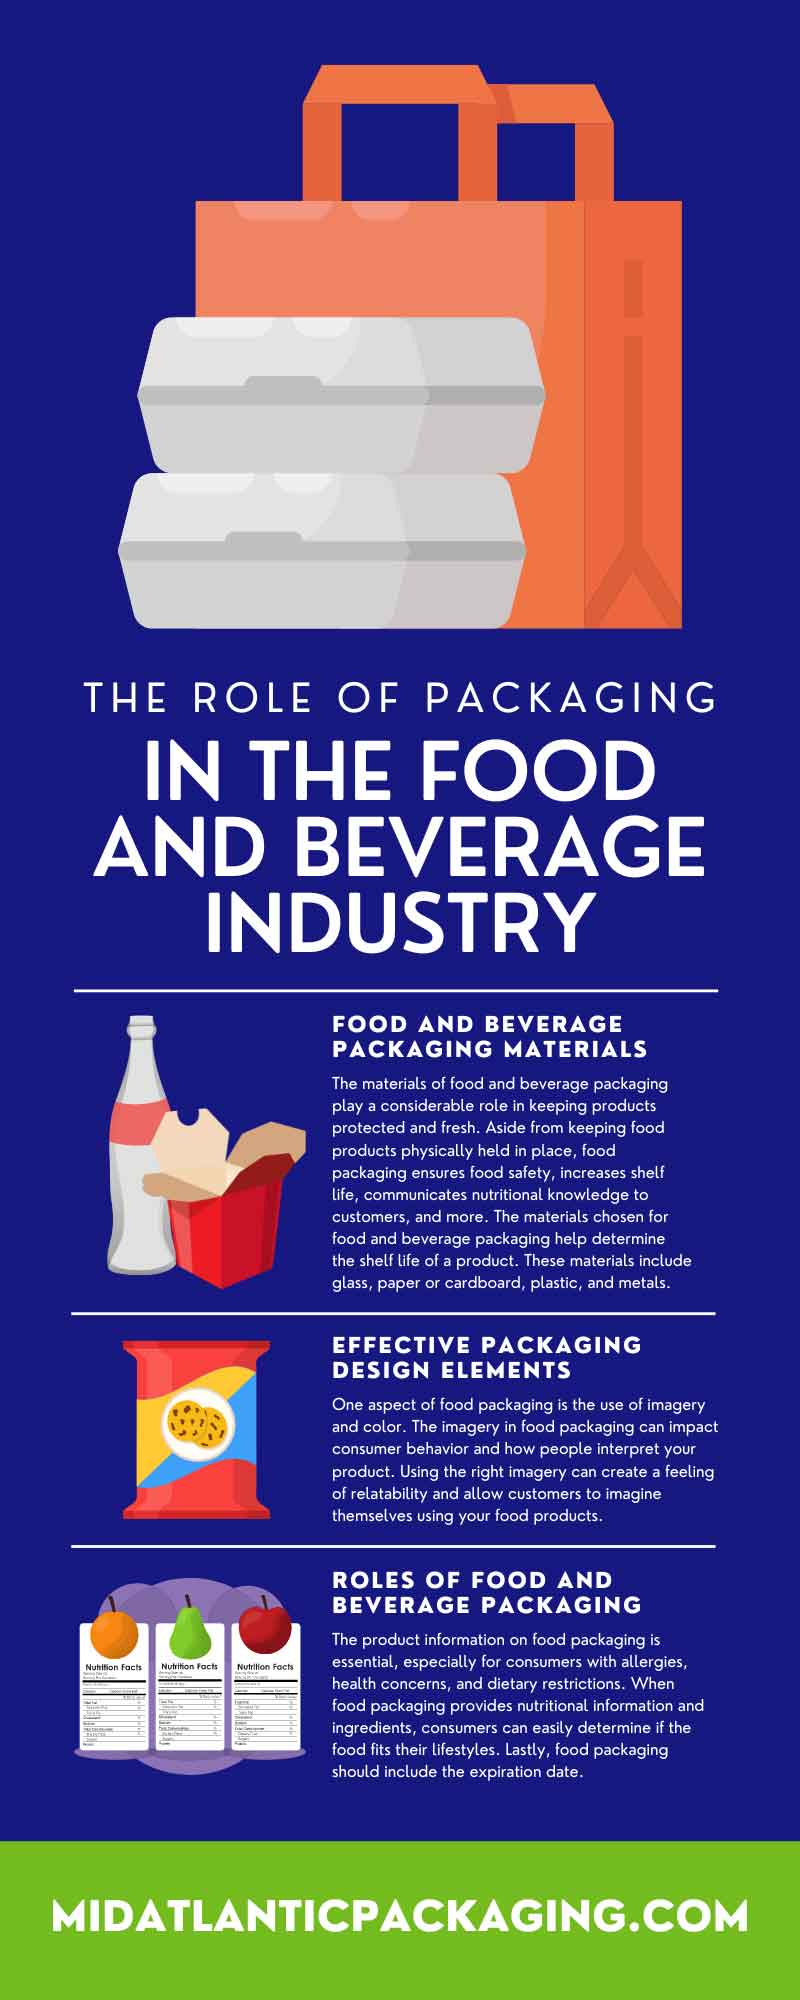 The Role of Packaging in the Food and Beverage Industry